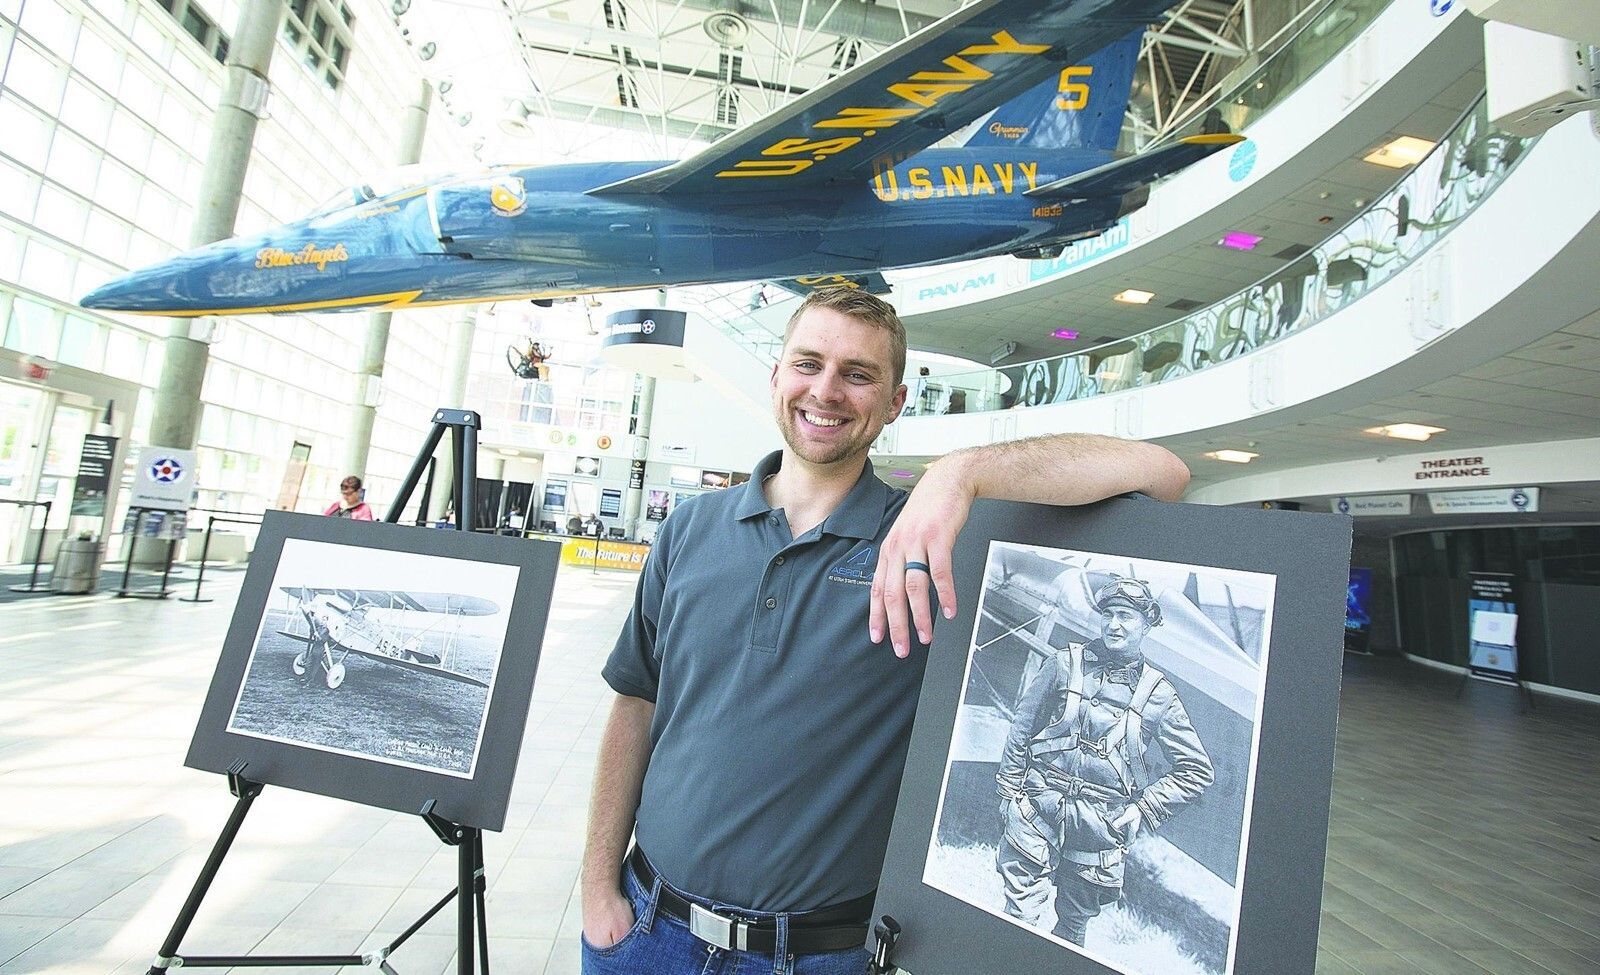 Nathan Hoch stands next to pictures of Russell Maughan, who made a transcontinental flight 100 years ago that Hoch plans to retrace.